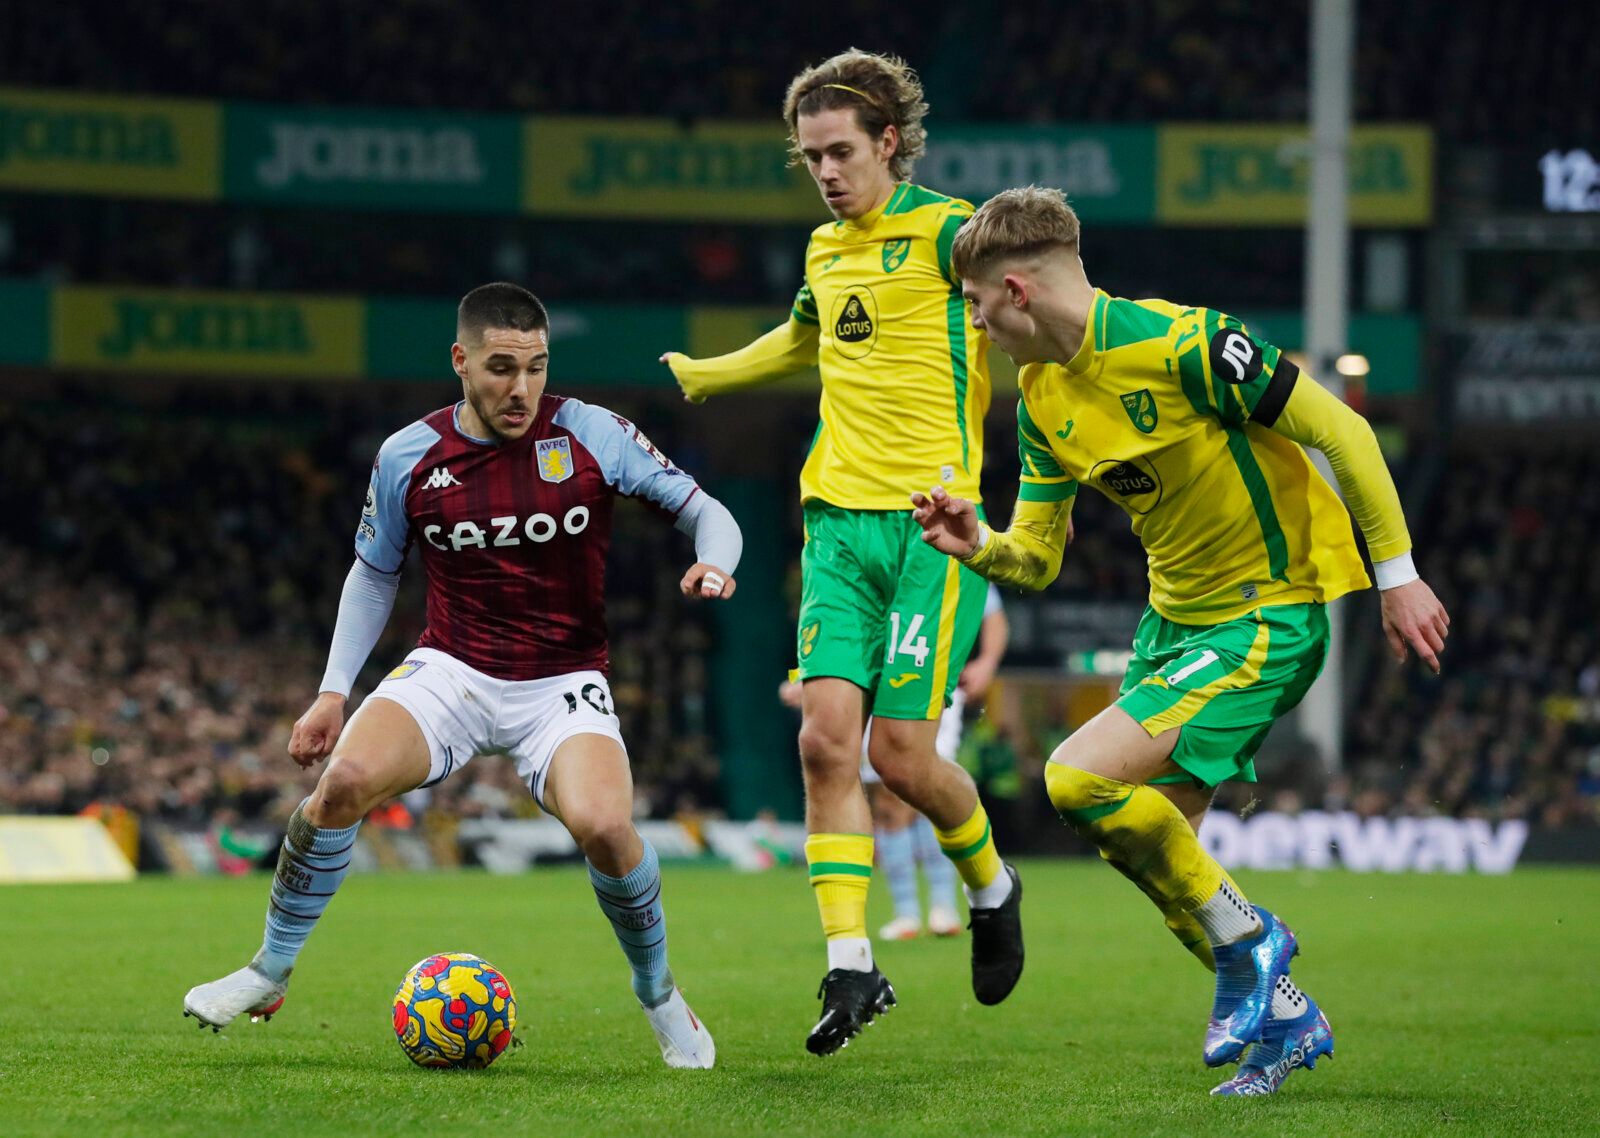 Soccer Football - Premier League - Norwich City v Aston Villa - Carrow Road, Norwich, Britain - December 14, 2021 Norwich City's Brandon Williams and Todd Cantwell in action with Aston Villa's Emiliano Buendia Action Images via Reuters/Andrew Couldridge EDITORIAL USE ONLY. No use with unauthorized audio, video, data, fixture lists, club/league logos or 'live' services. Online in-match use limited to 75 images, no video emulation. No use in betting, games or single club /league/player publication